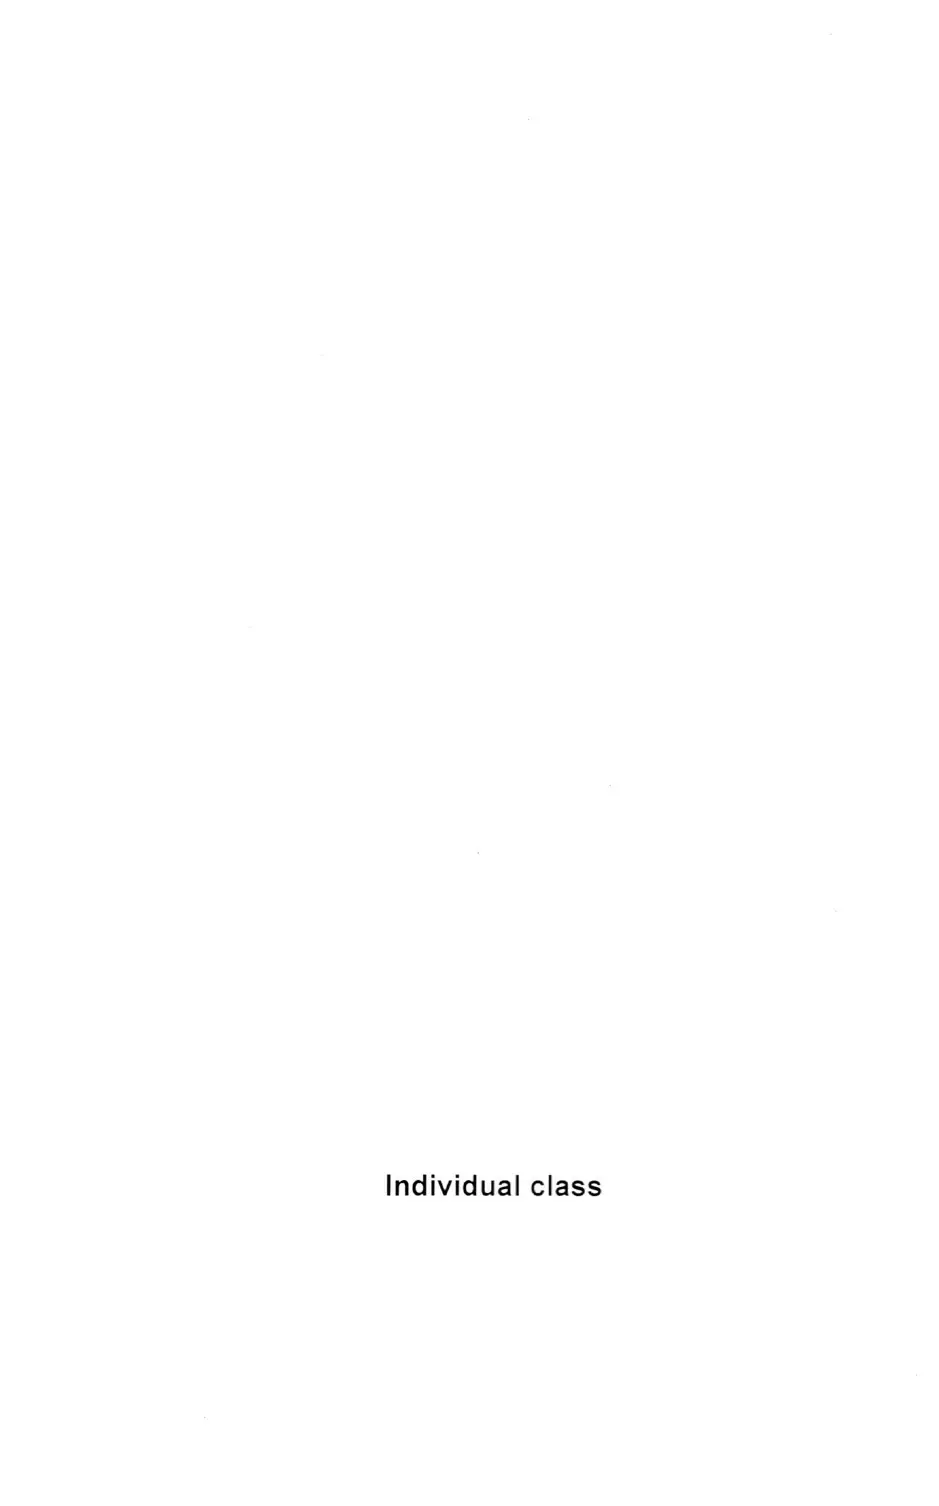 INDIVIDUAL CLASS Page.2